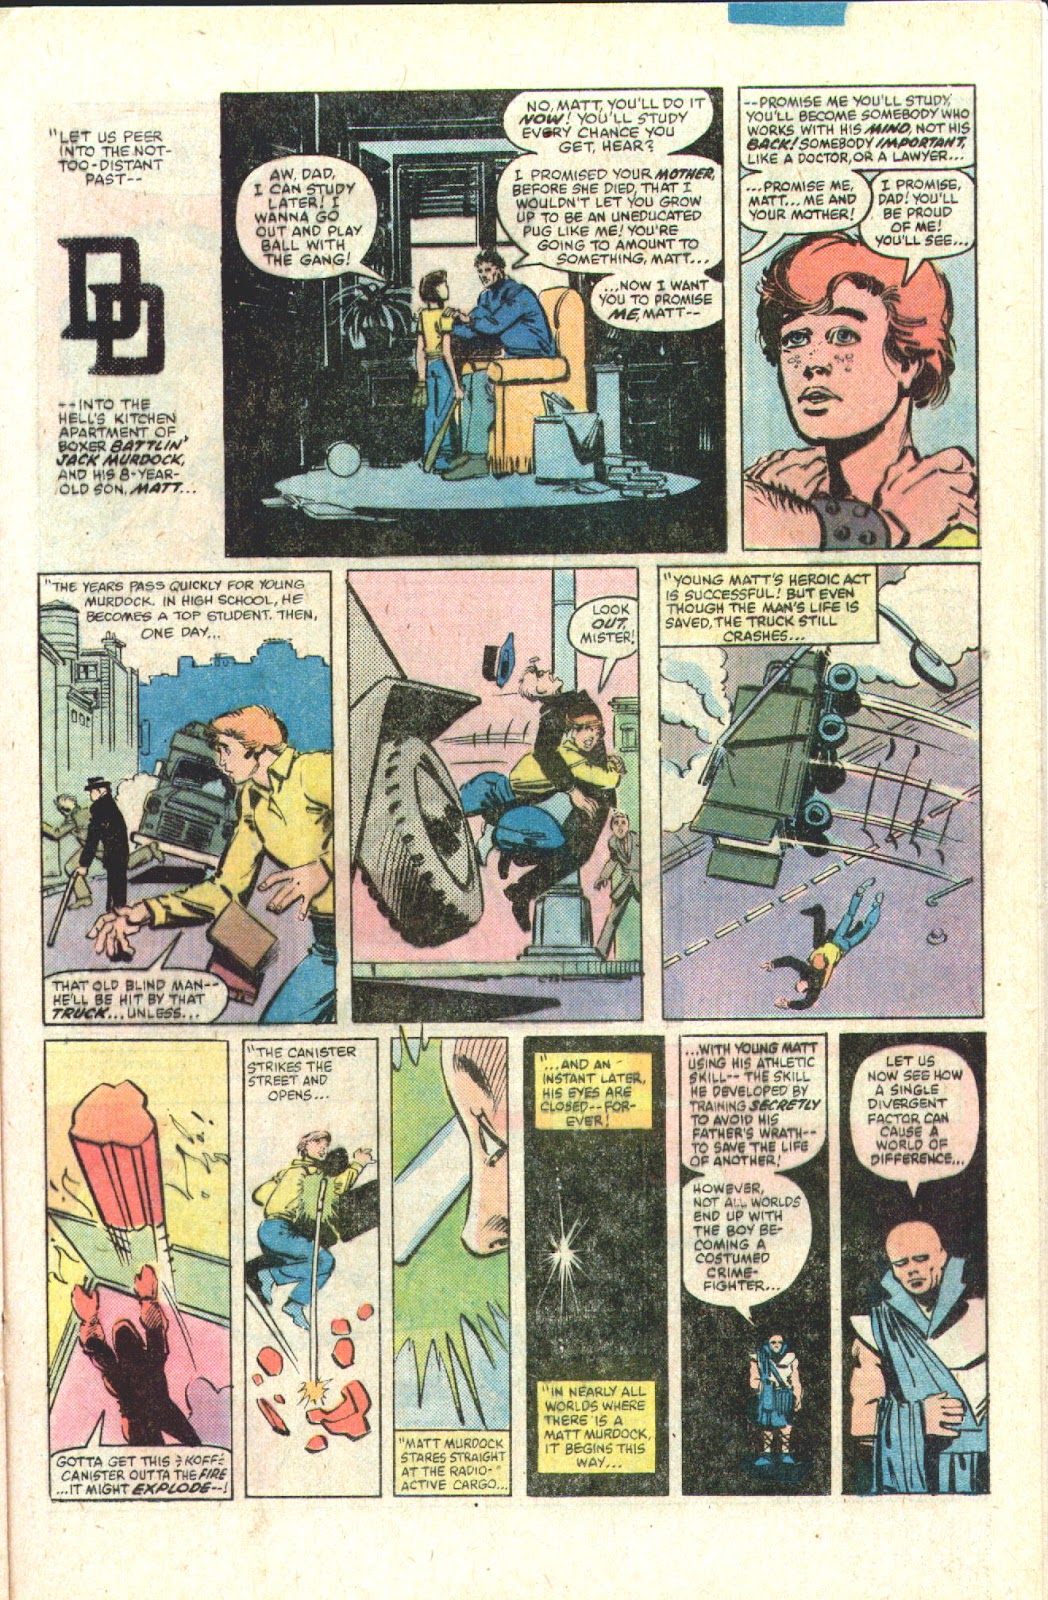 What If? (1977) issue 28 - Daredevil became an agent of SHIELD - Page 28